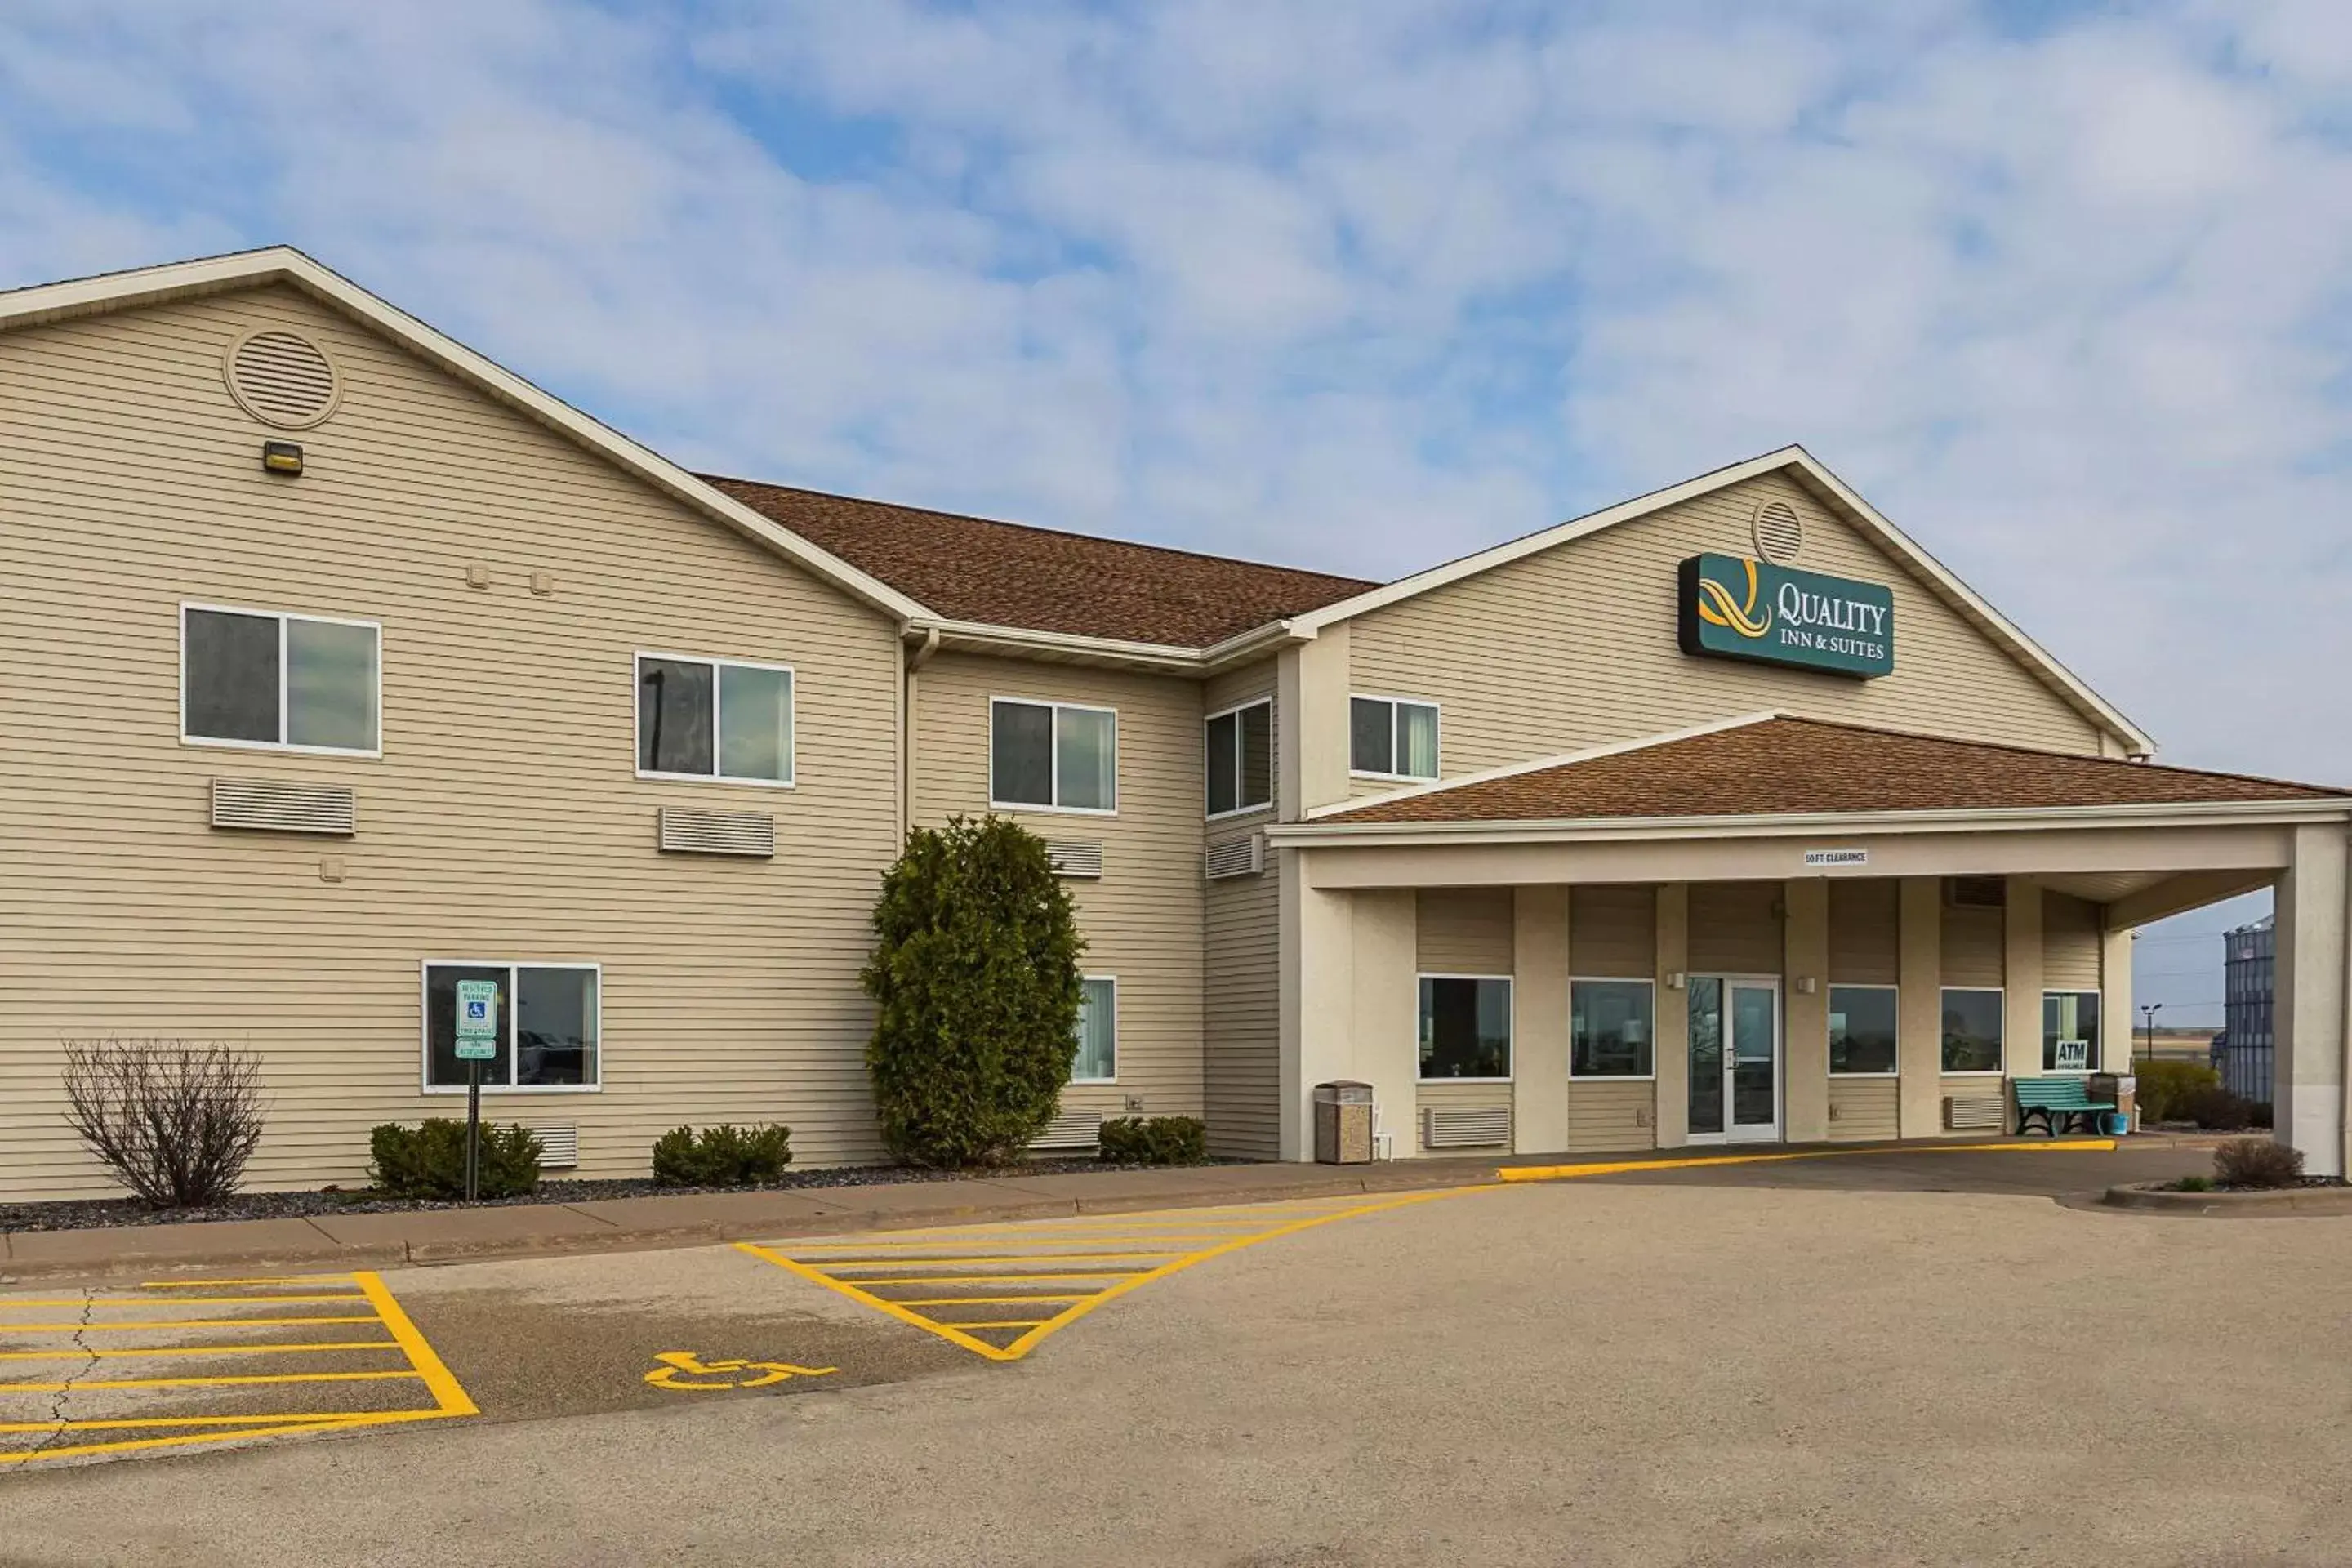 Property Building in Quality Inn & Suites Belmont Route 151